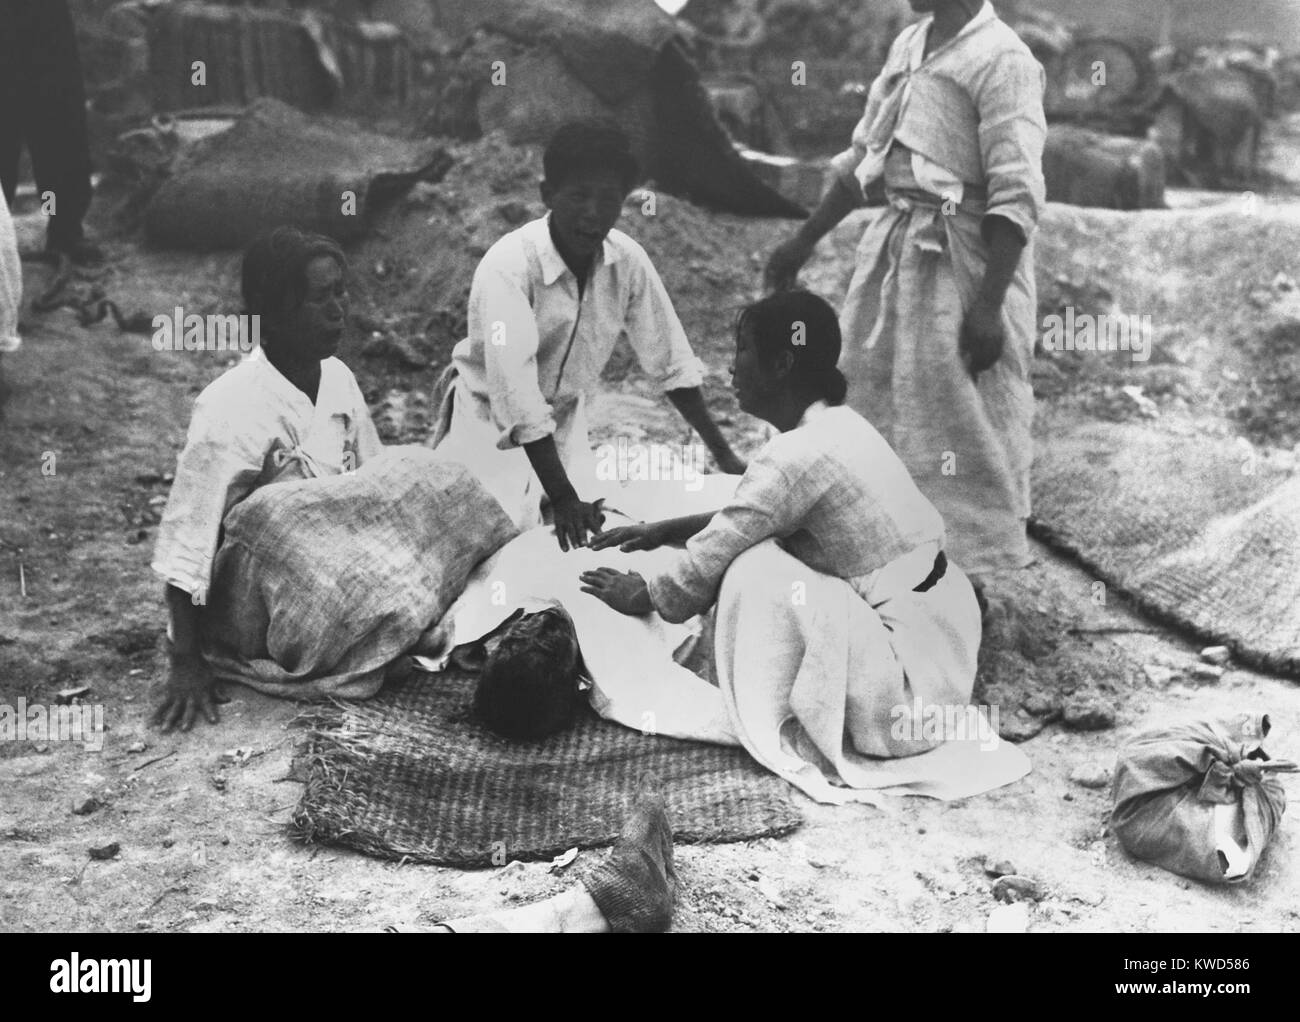 A Korean family mourns their murdered father, killed in mass executions at Chonju by North Koreans. Victims were mostly South Korean police and youth group leaders who were forced to dig a pit, then killed and thrown in it. Sept 17, 1950. Korean War, 1950-53. (BSLOC 2014 11 238) Stock Photo